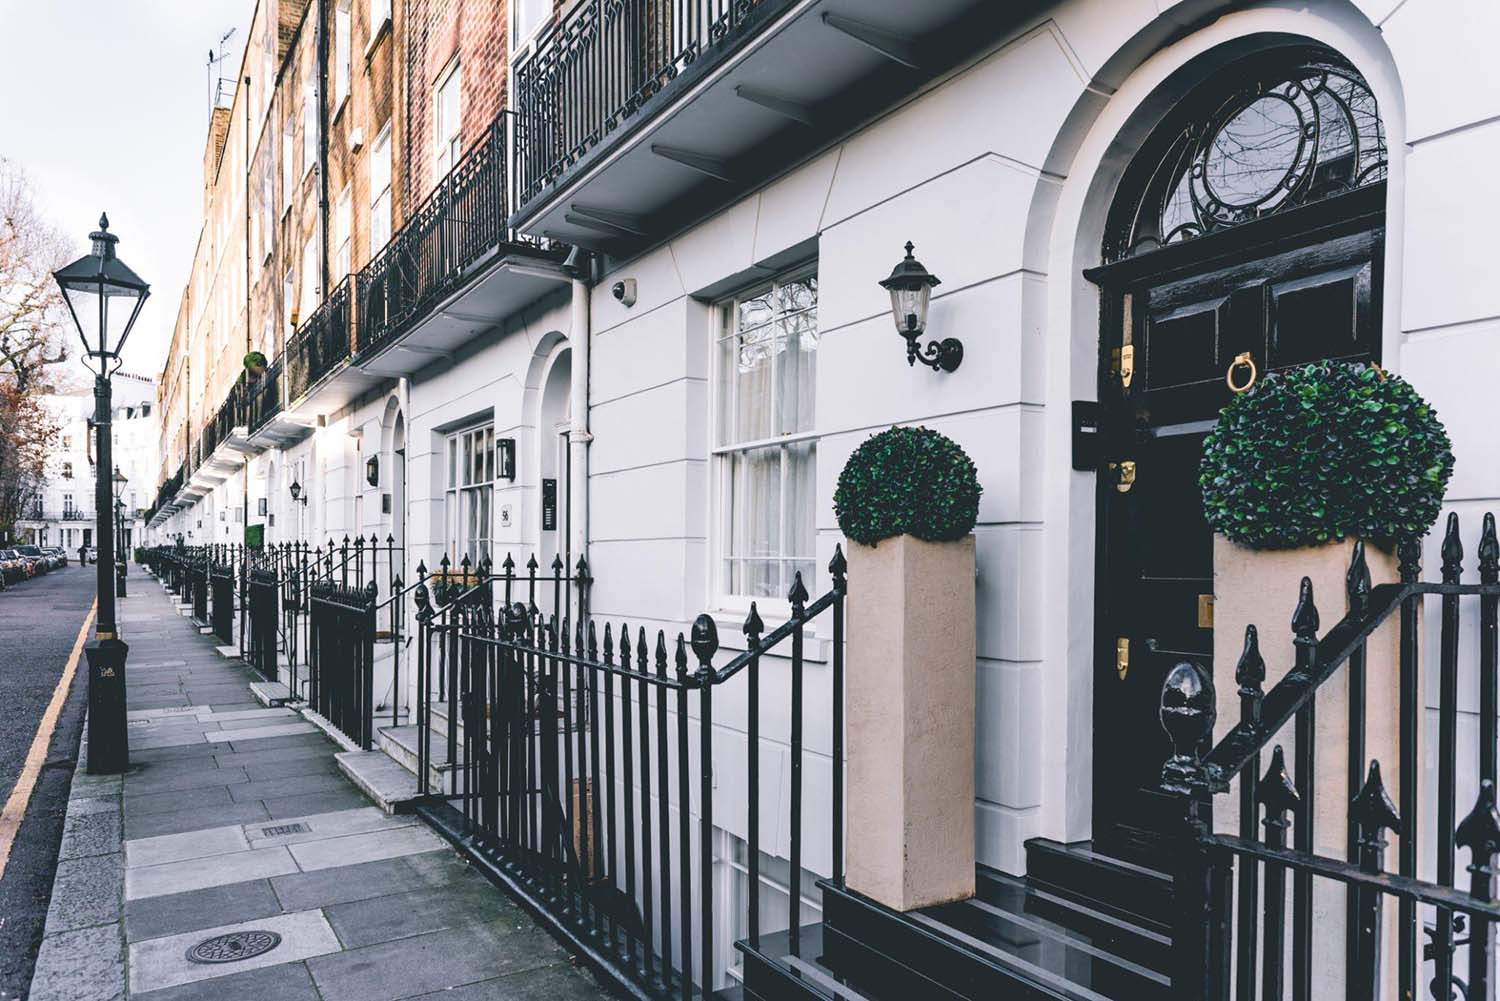 London Serviced Apartments: A Comprehensive Guide to Finding the Best Short-Term Accommodation in London